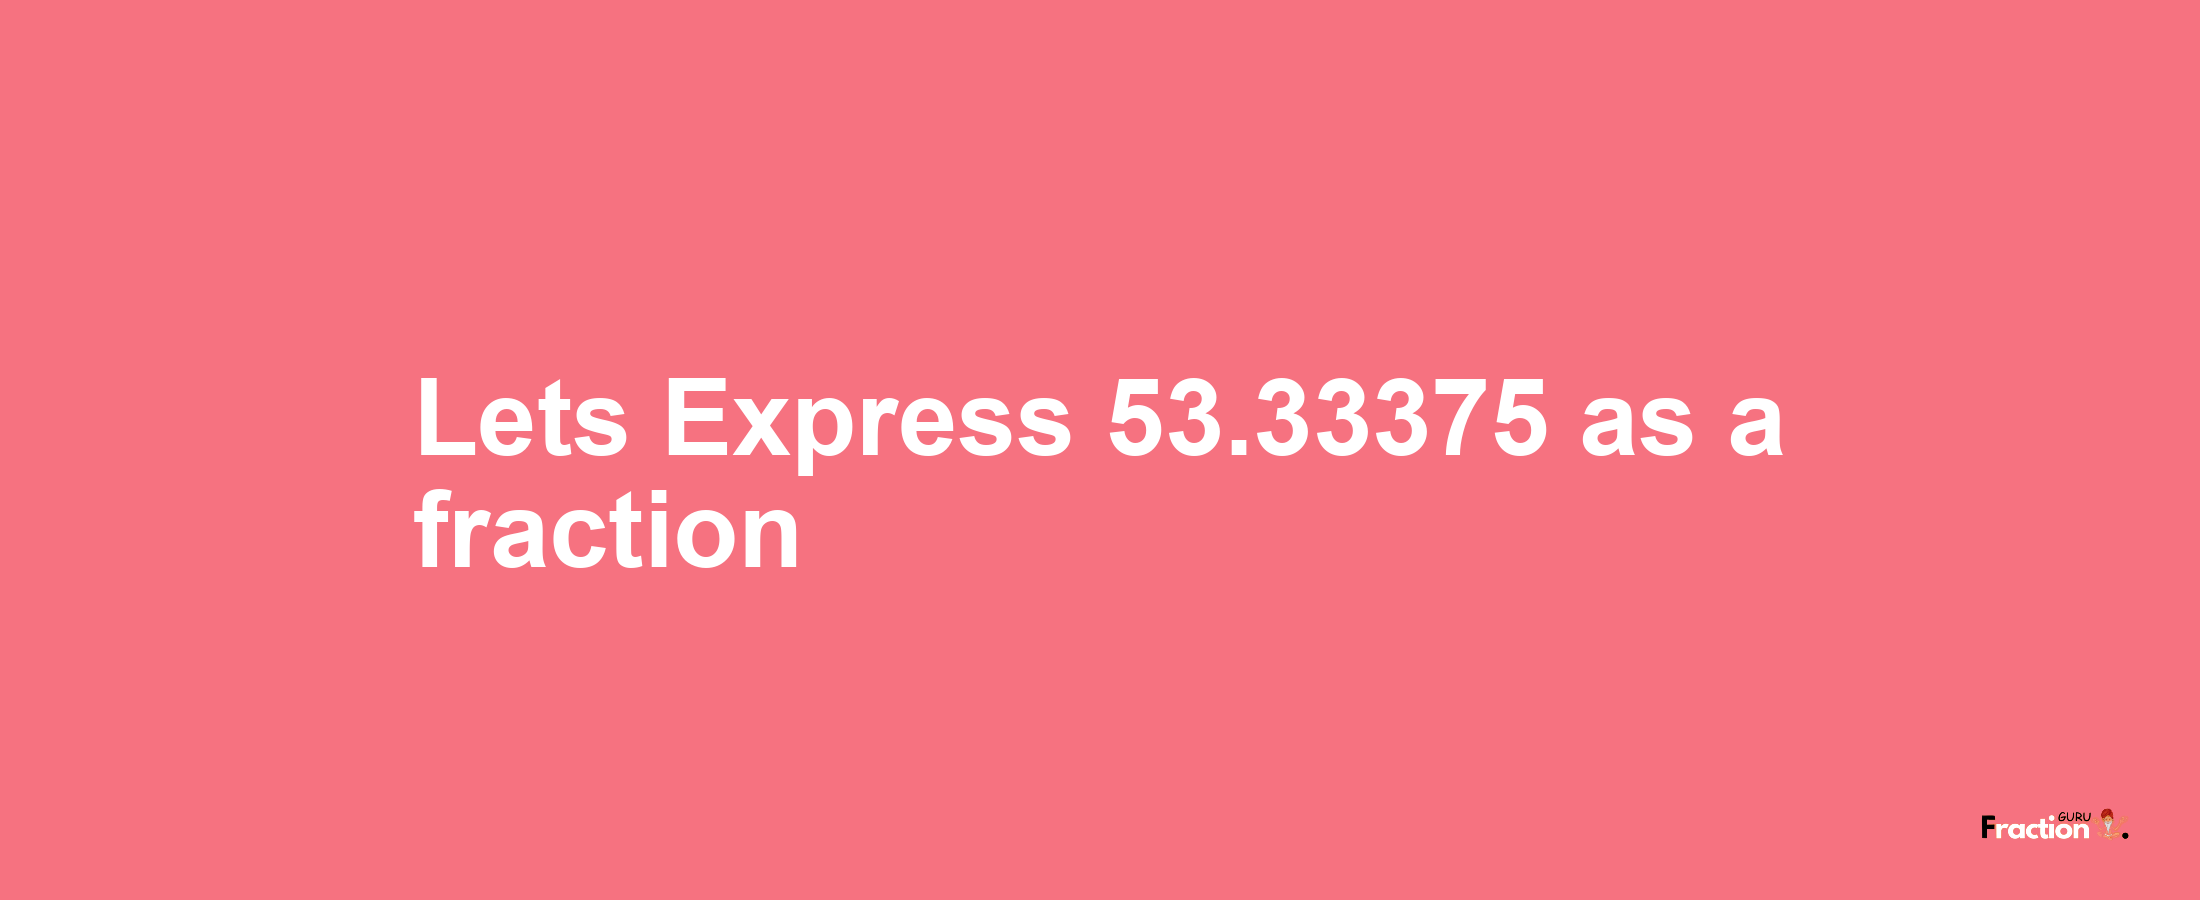 Lets Express 53.33375 as afraction